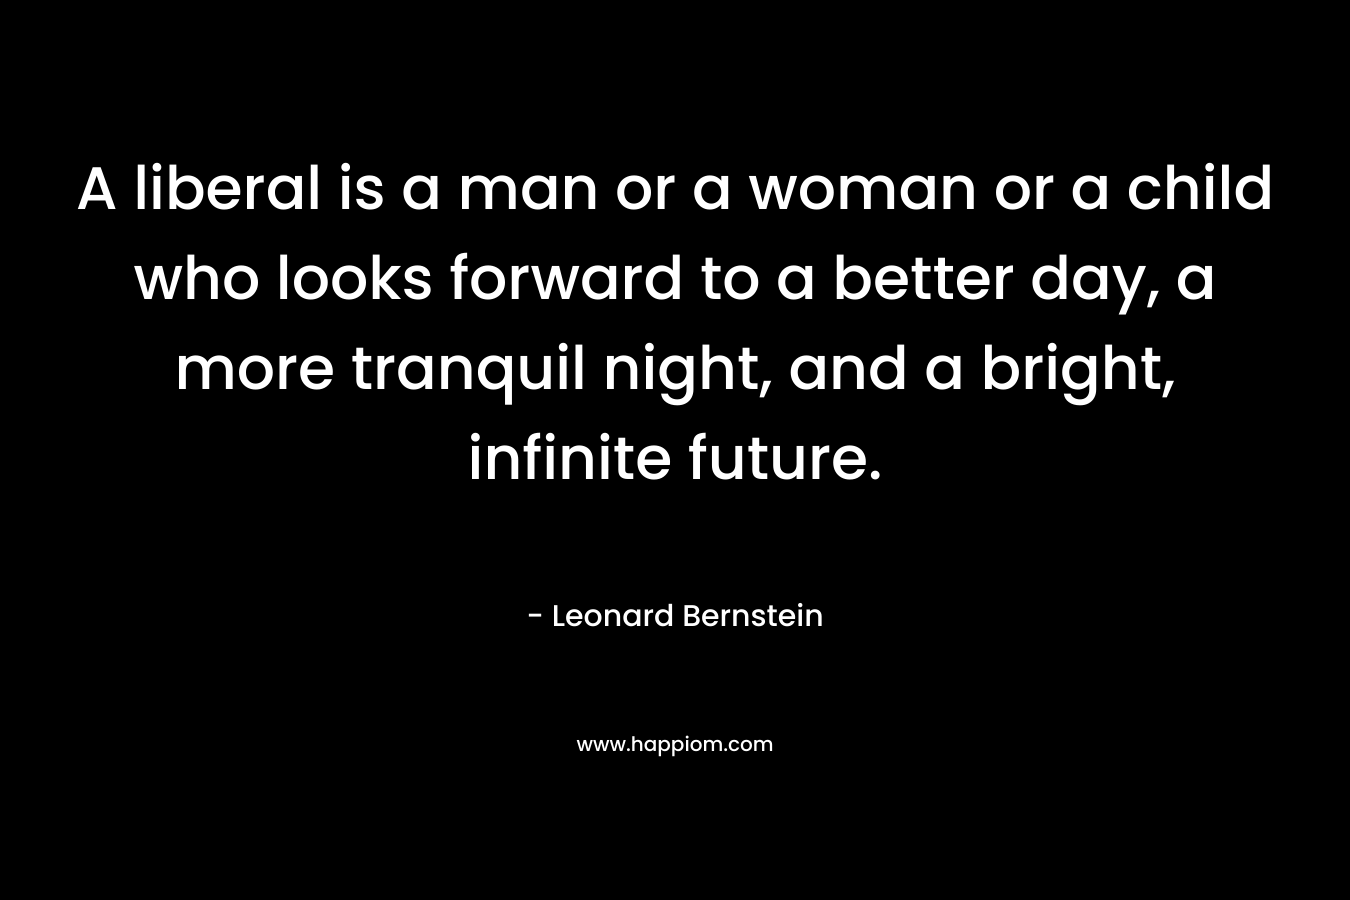 A liberal is a man or a woman or a child who looks forward to a better day, a more tranquil night, and a bright, infinite future. – Leonard Bernstein